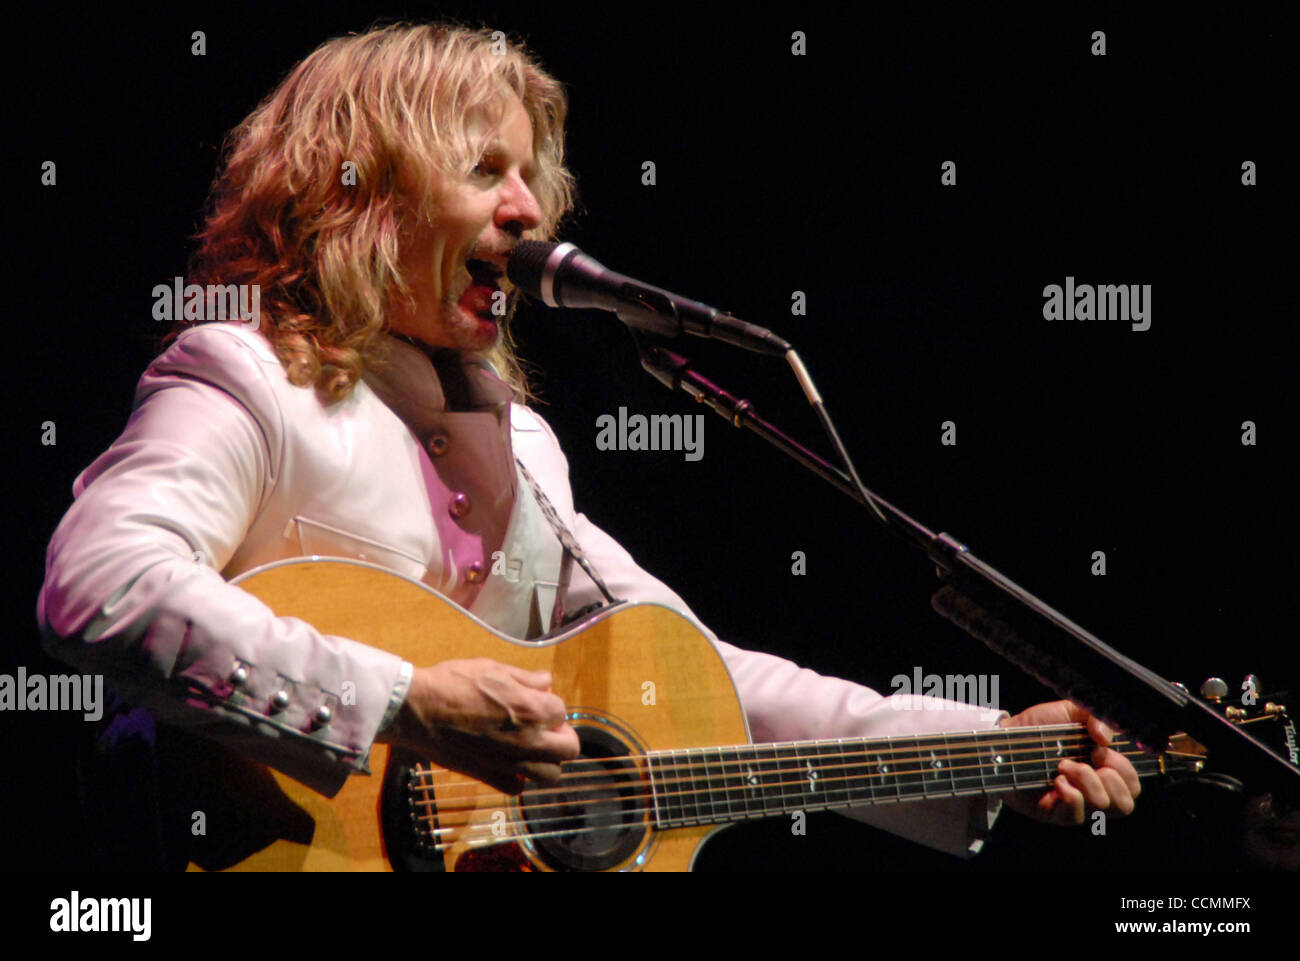 Oct 28, 2010 - New York, New York, U.S. - Singer/guitarist TOMMY SHAW and rock band STYX performing live in concert at the Beacon Theater in NYC. (Credit Image: © Jeffrey Geller/ZUMApress.com) Stock Photo